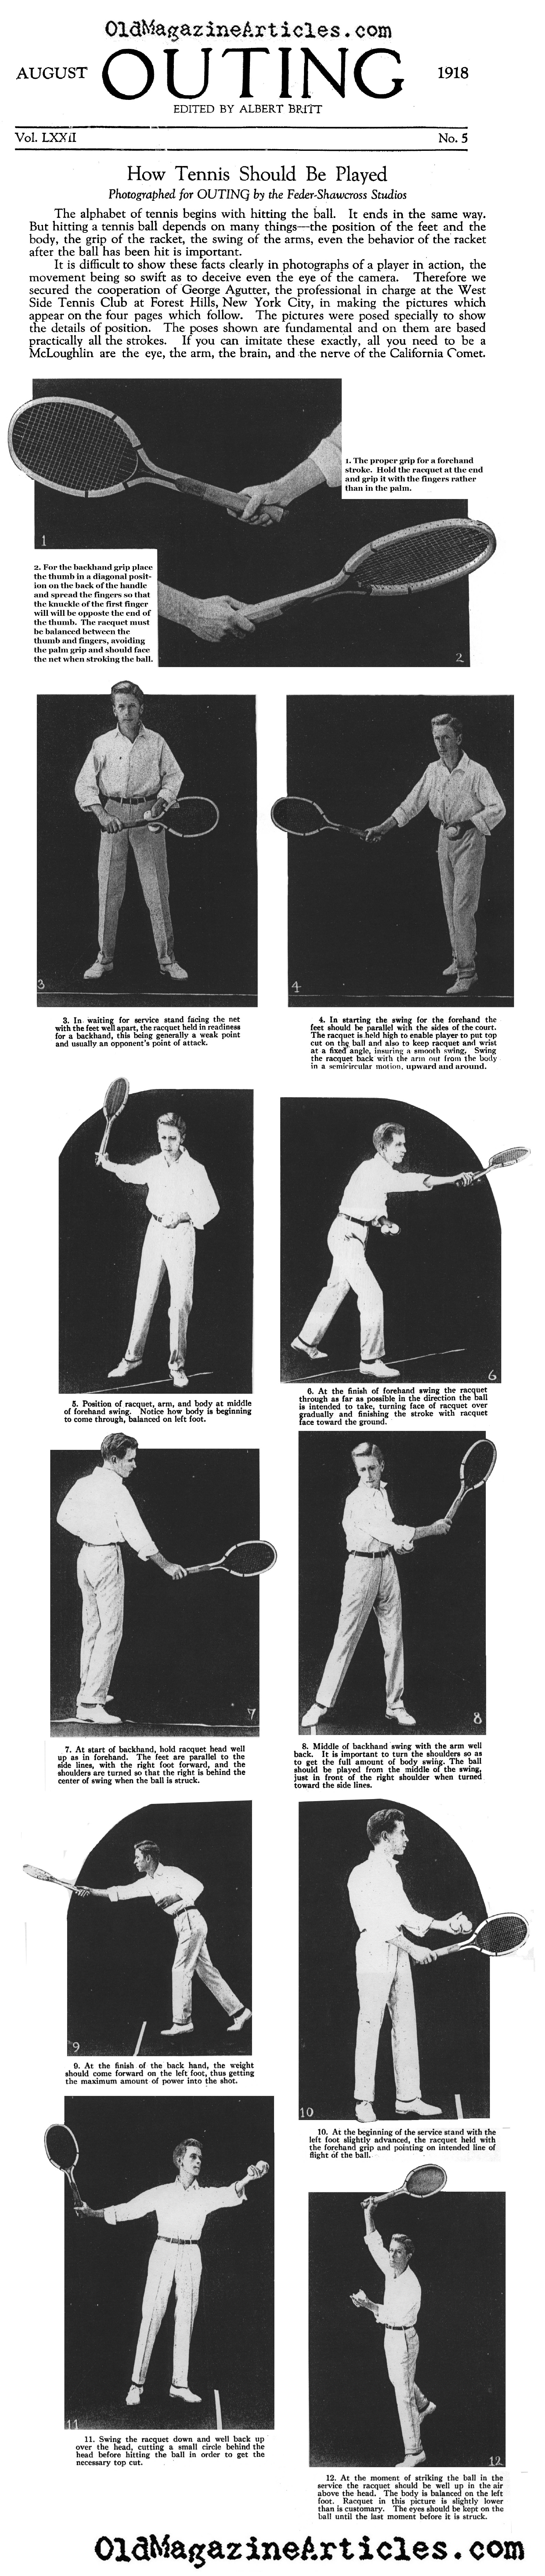 How Tennis Should Be Played (Outing Magazine, 1918)